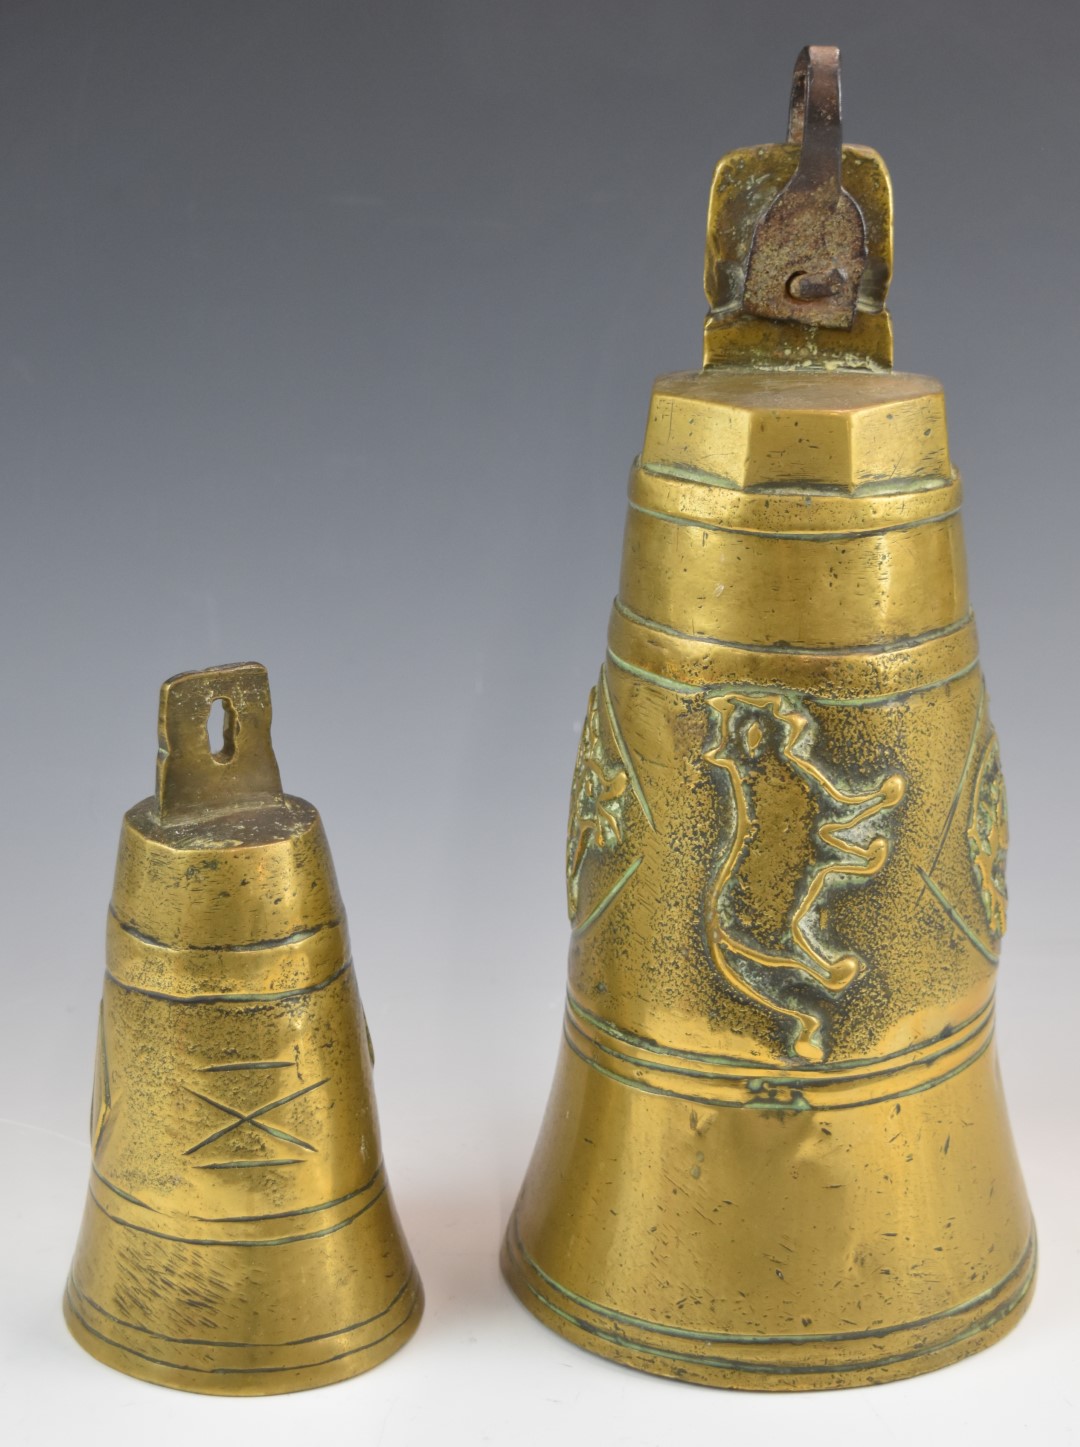 Two 18th / 19thC Chinese / Tibetan brass or bronze bells - Image 2 of 2